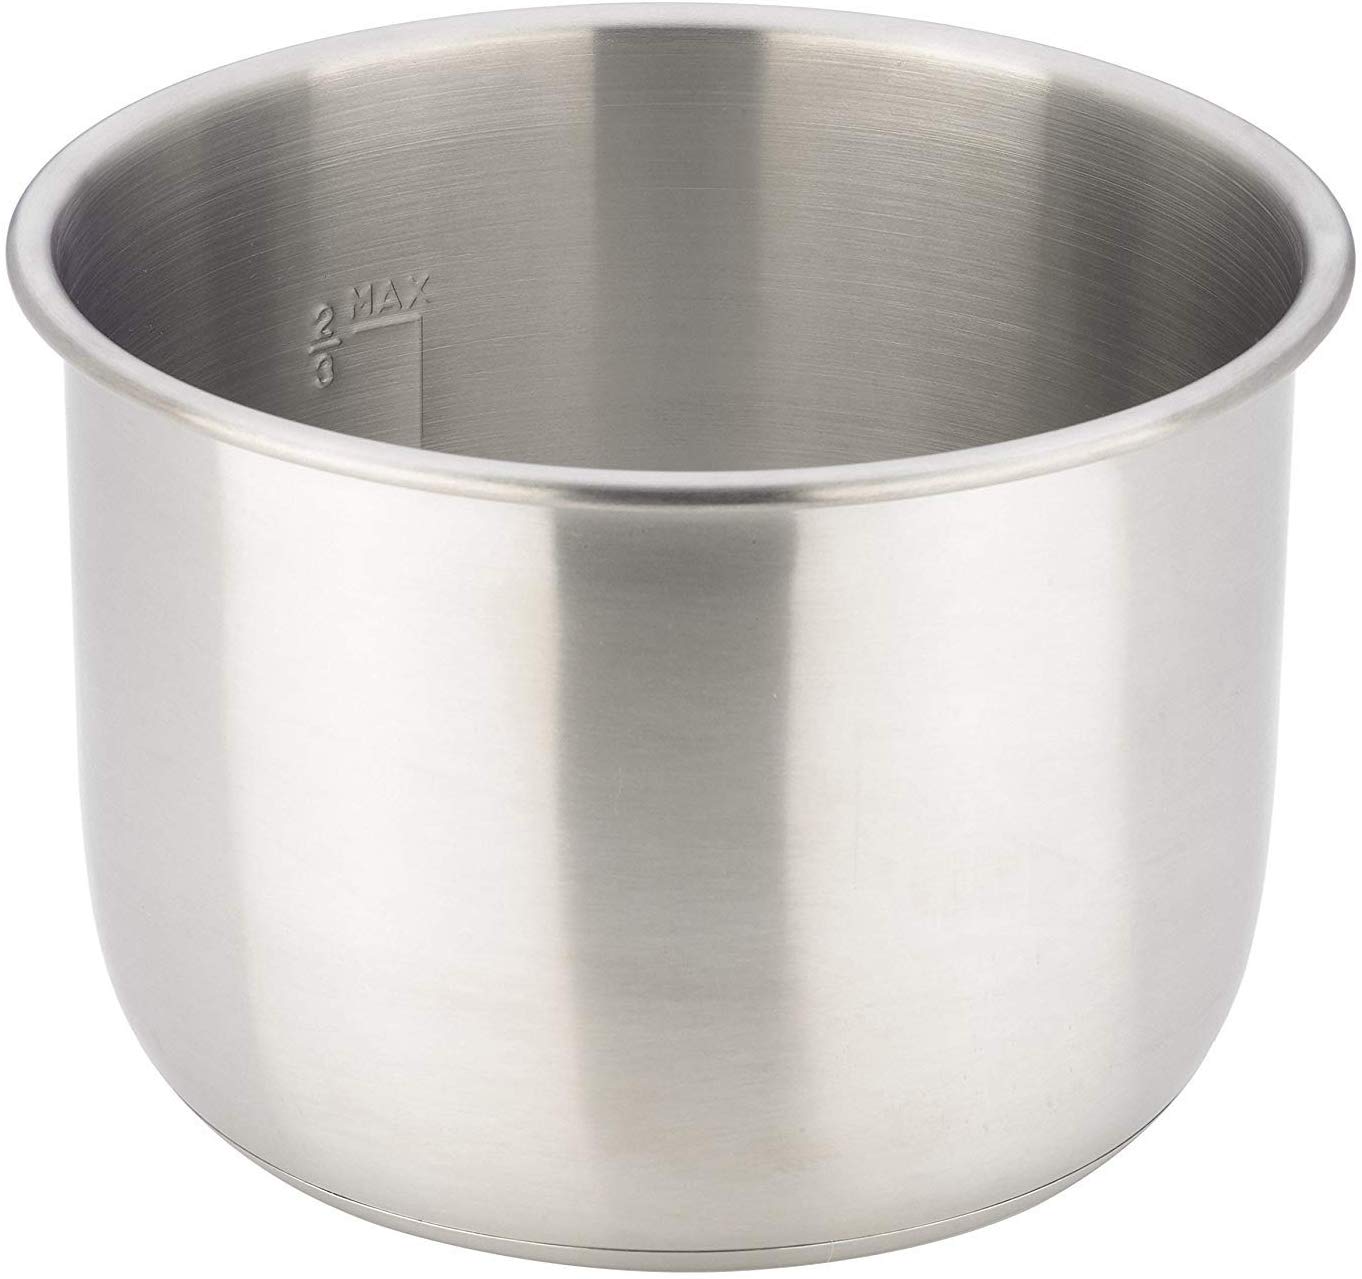 GJS Gourmet Replacement Stainless Steel Inner Cooking Pot